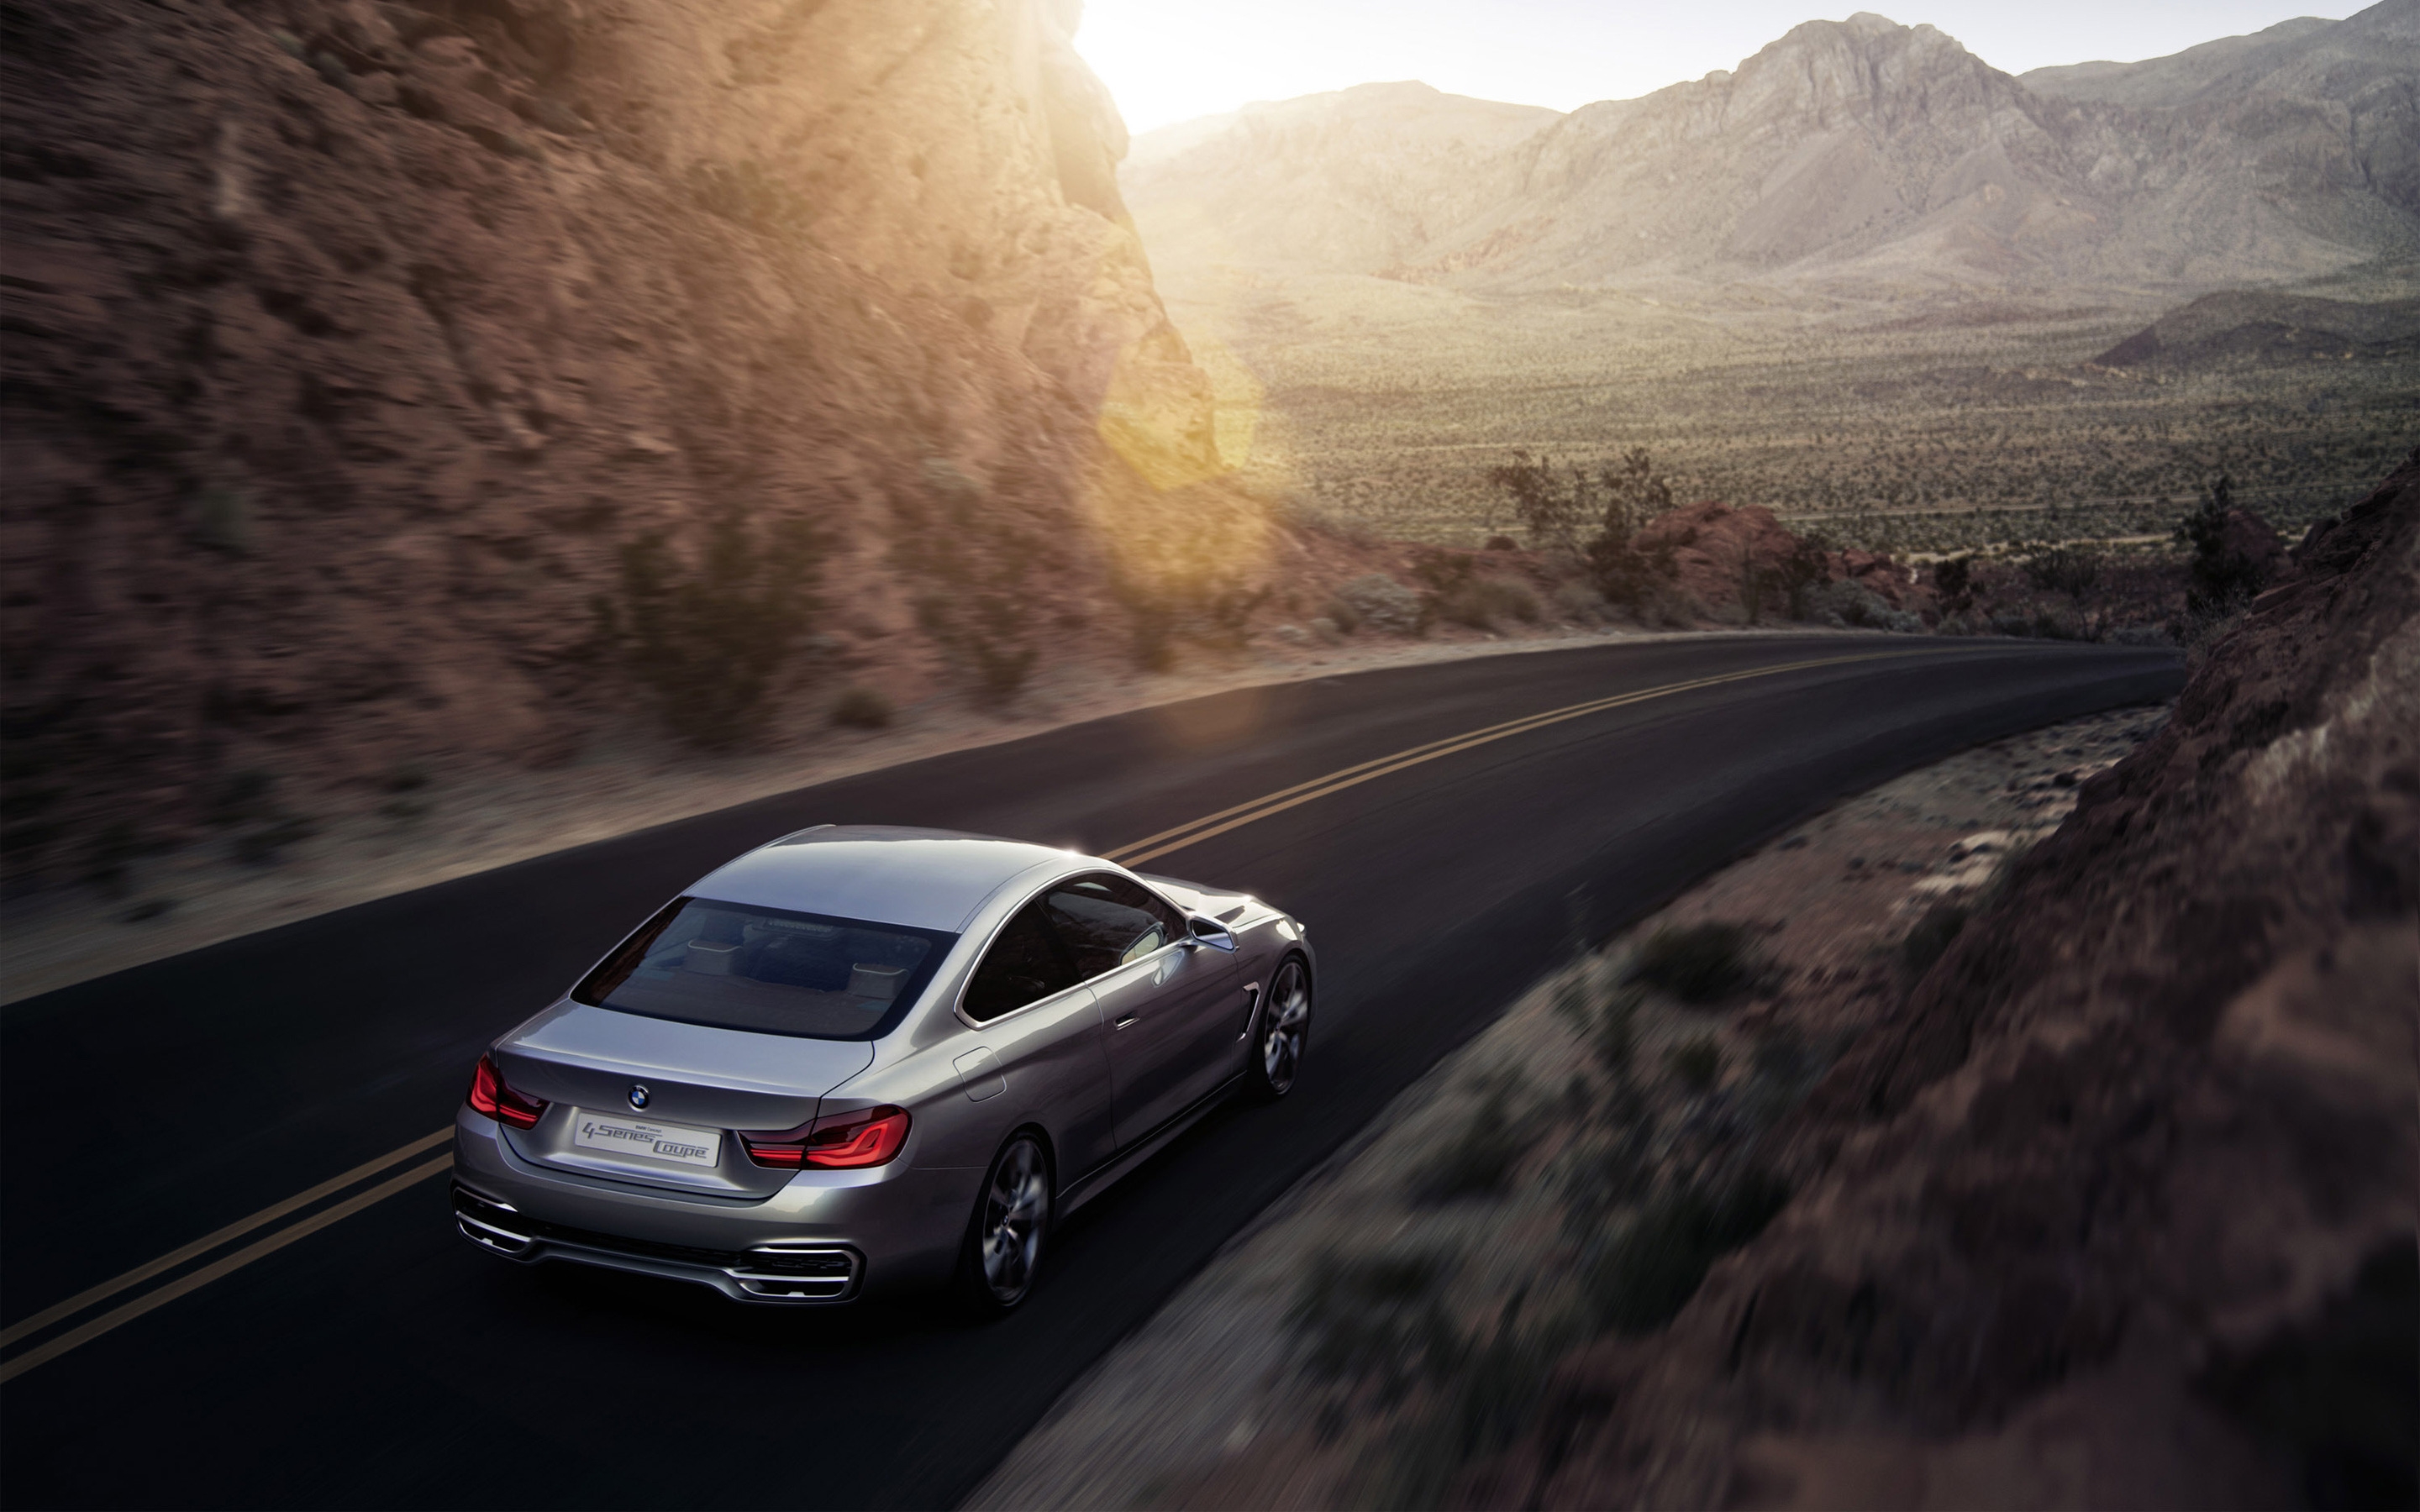 BMW 4 Series and Sunset for 2880 x 1800 Retina Display resolution